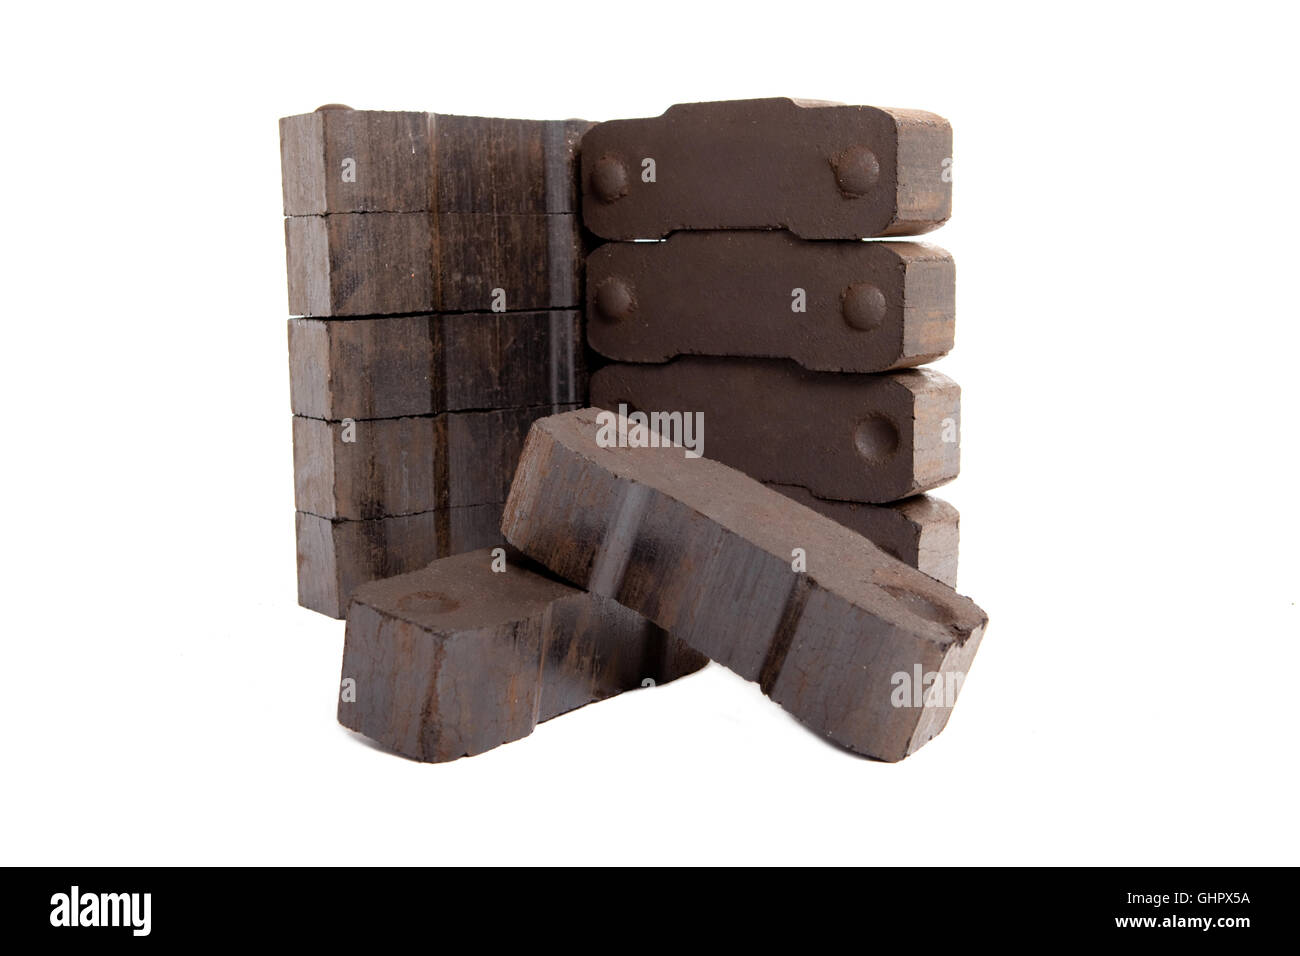 tower of lignite briquettes with two single bricks in front, white background, isolated, copy space, Stock Photo